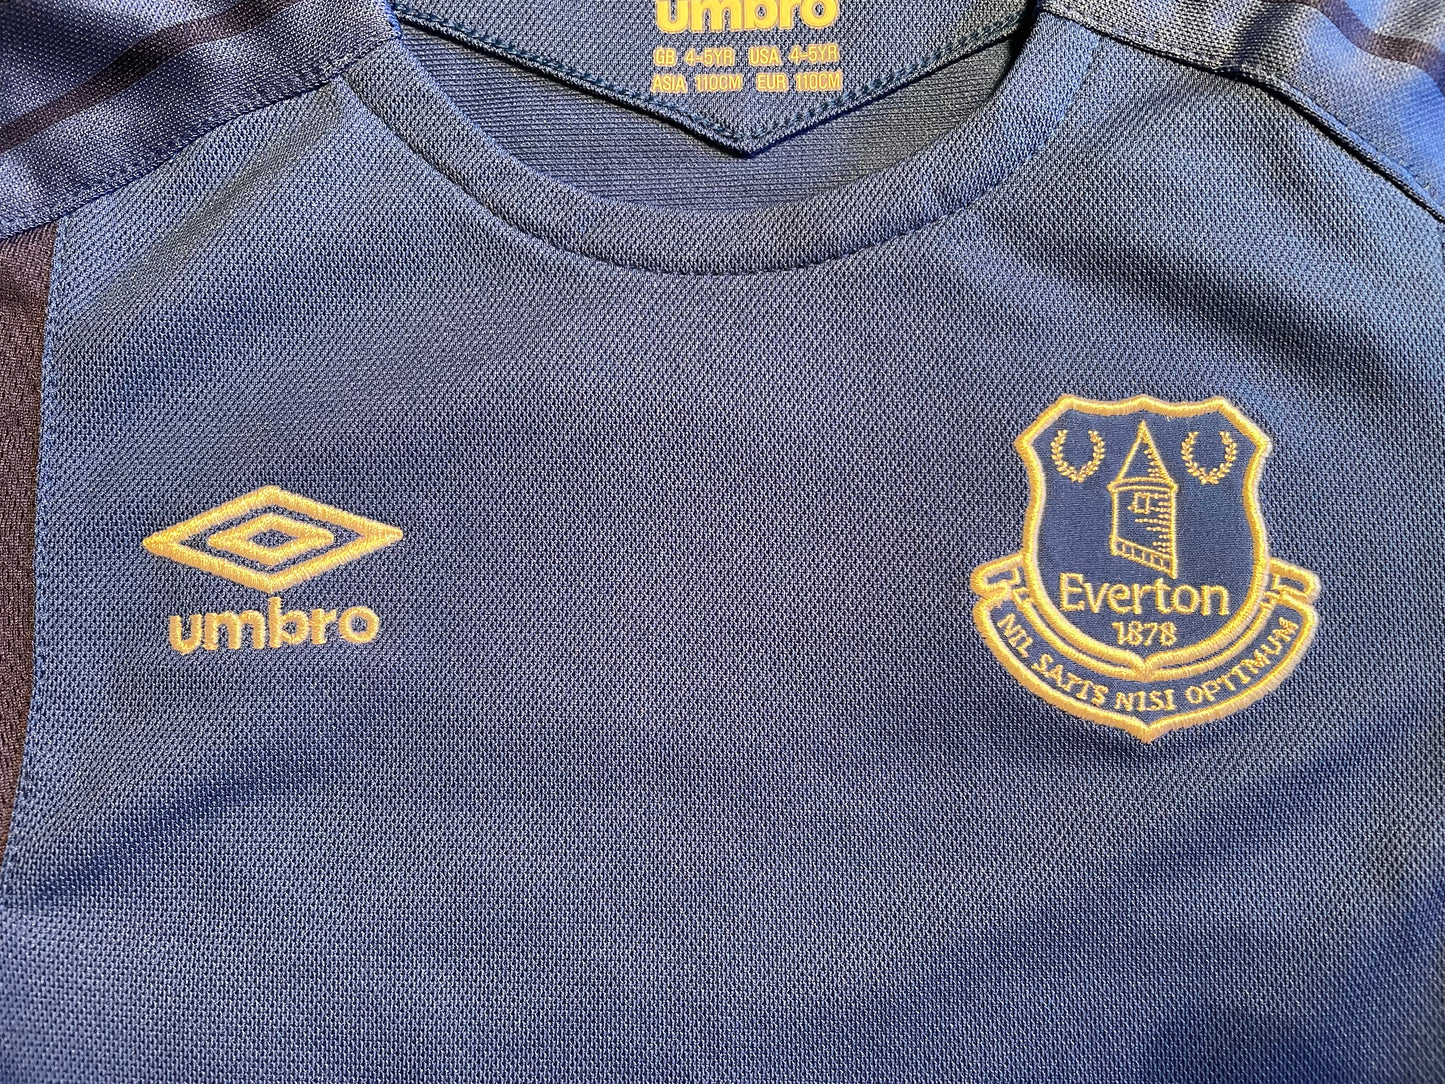 Everton 2017 Home Shirt (excellent) Childs age 4 to 5 years. Height 13.5 inches